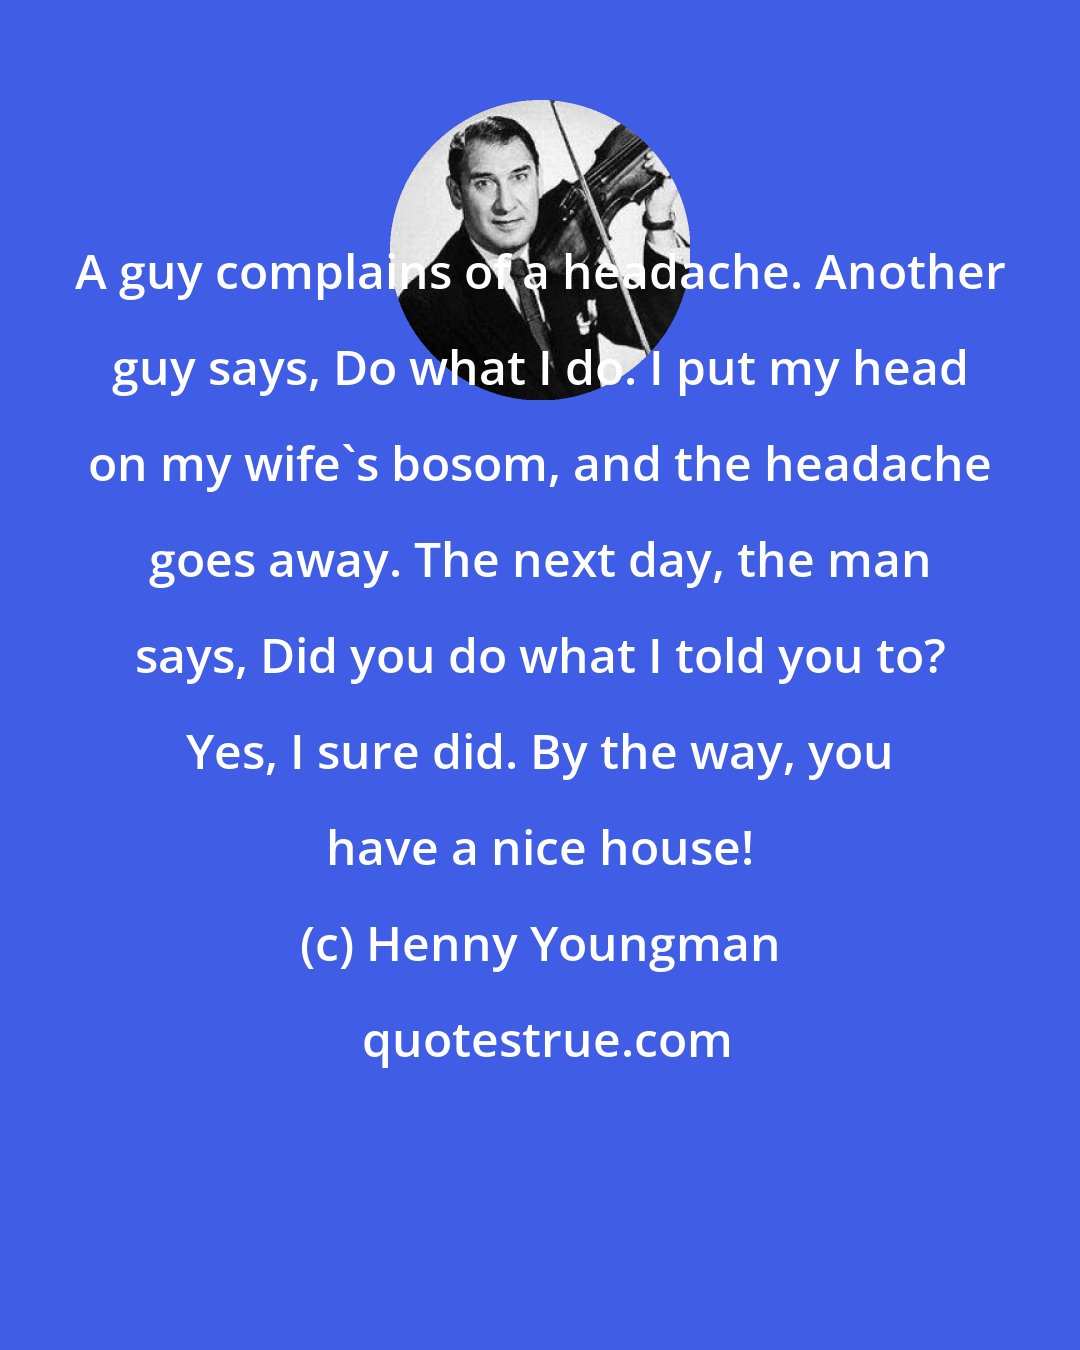 Henny Youngman: A guy complains of a headache. Another guy says, Do what I do. I put my head on my wife's bosom, and the headache goes away. The next day, the man says, Did you do what I told you to? Yes, I sure did. By the way, you have a nice house!